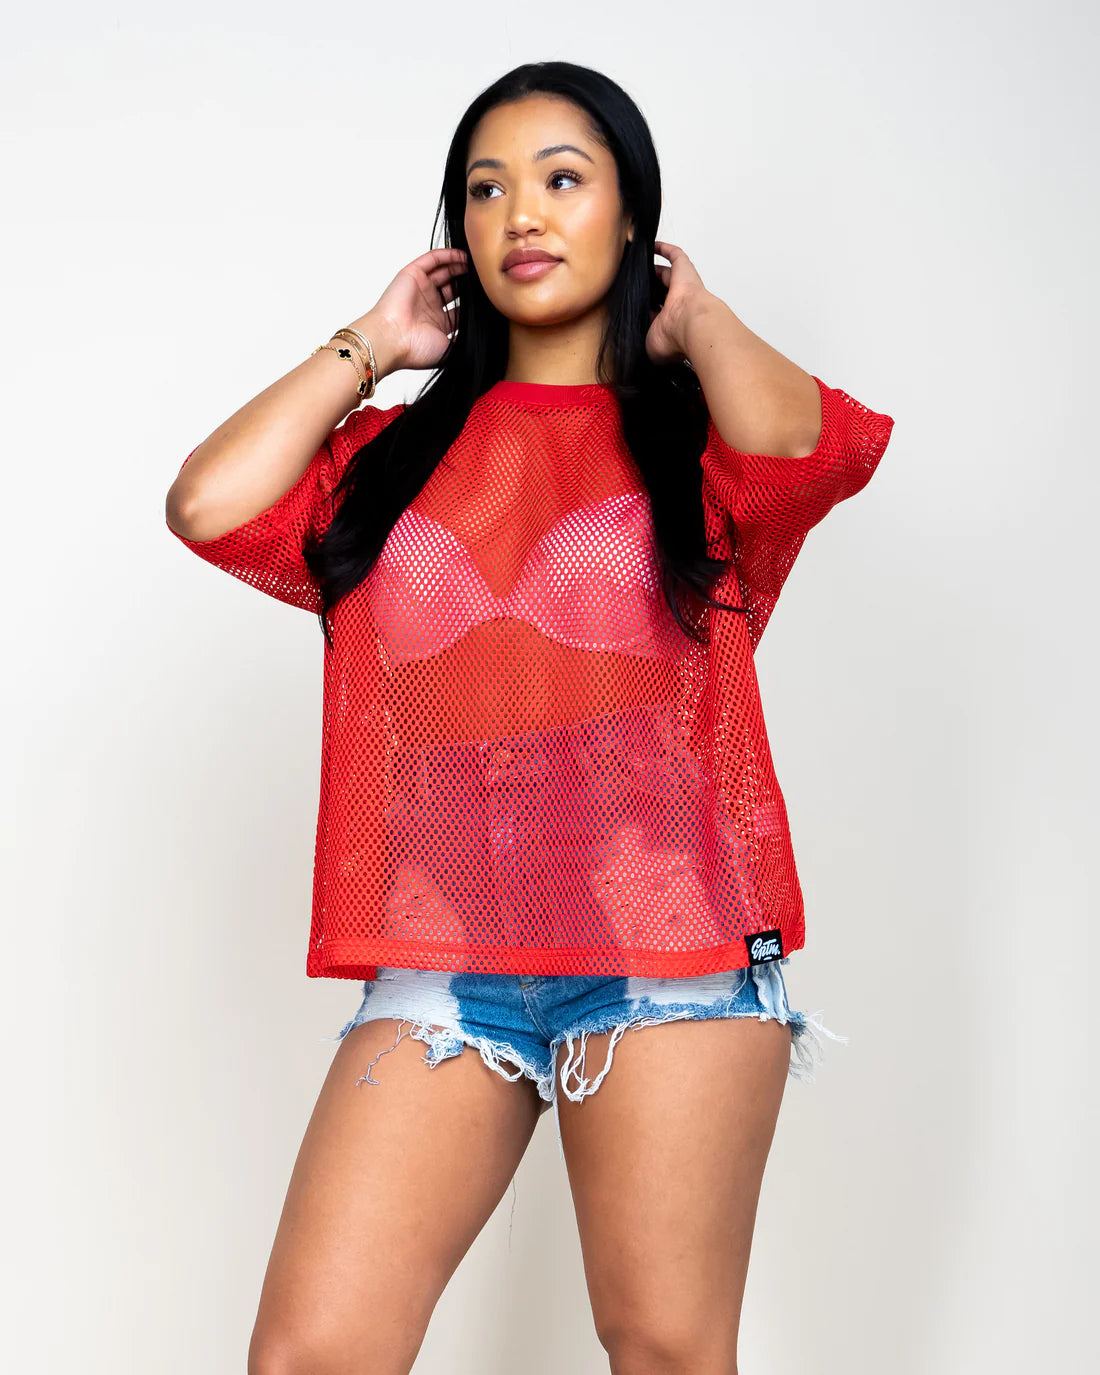 EPTEM MESH STADIUM JERSEY IN RED (model front view on woman) -8586